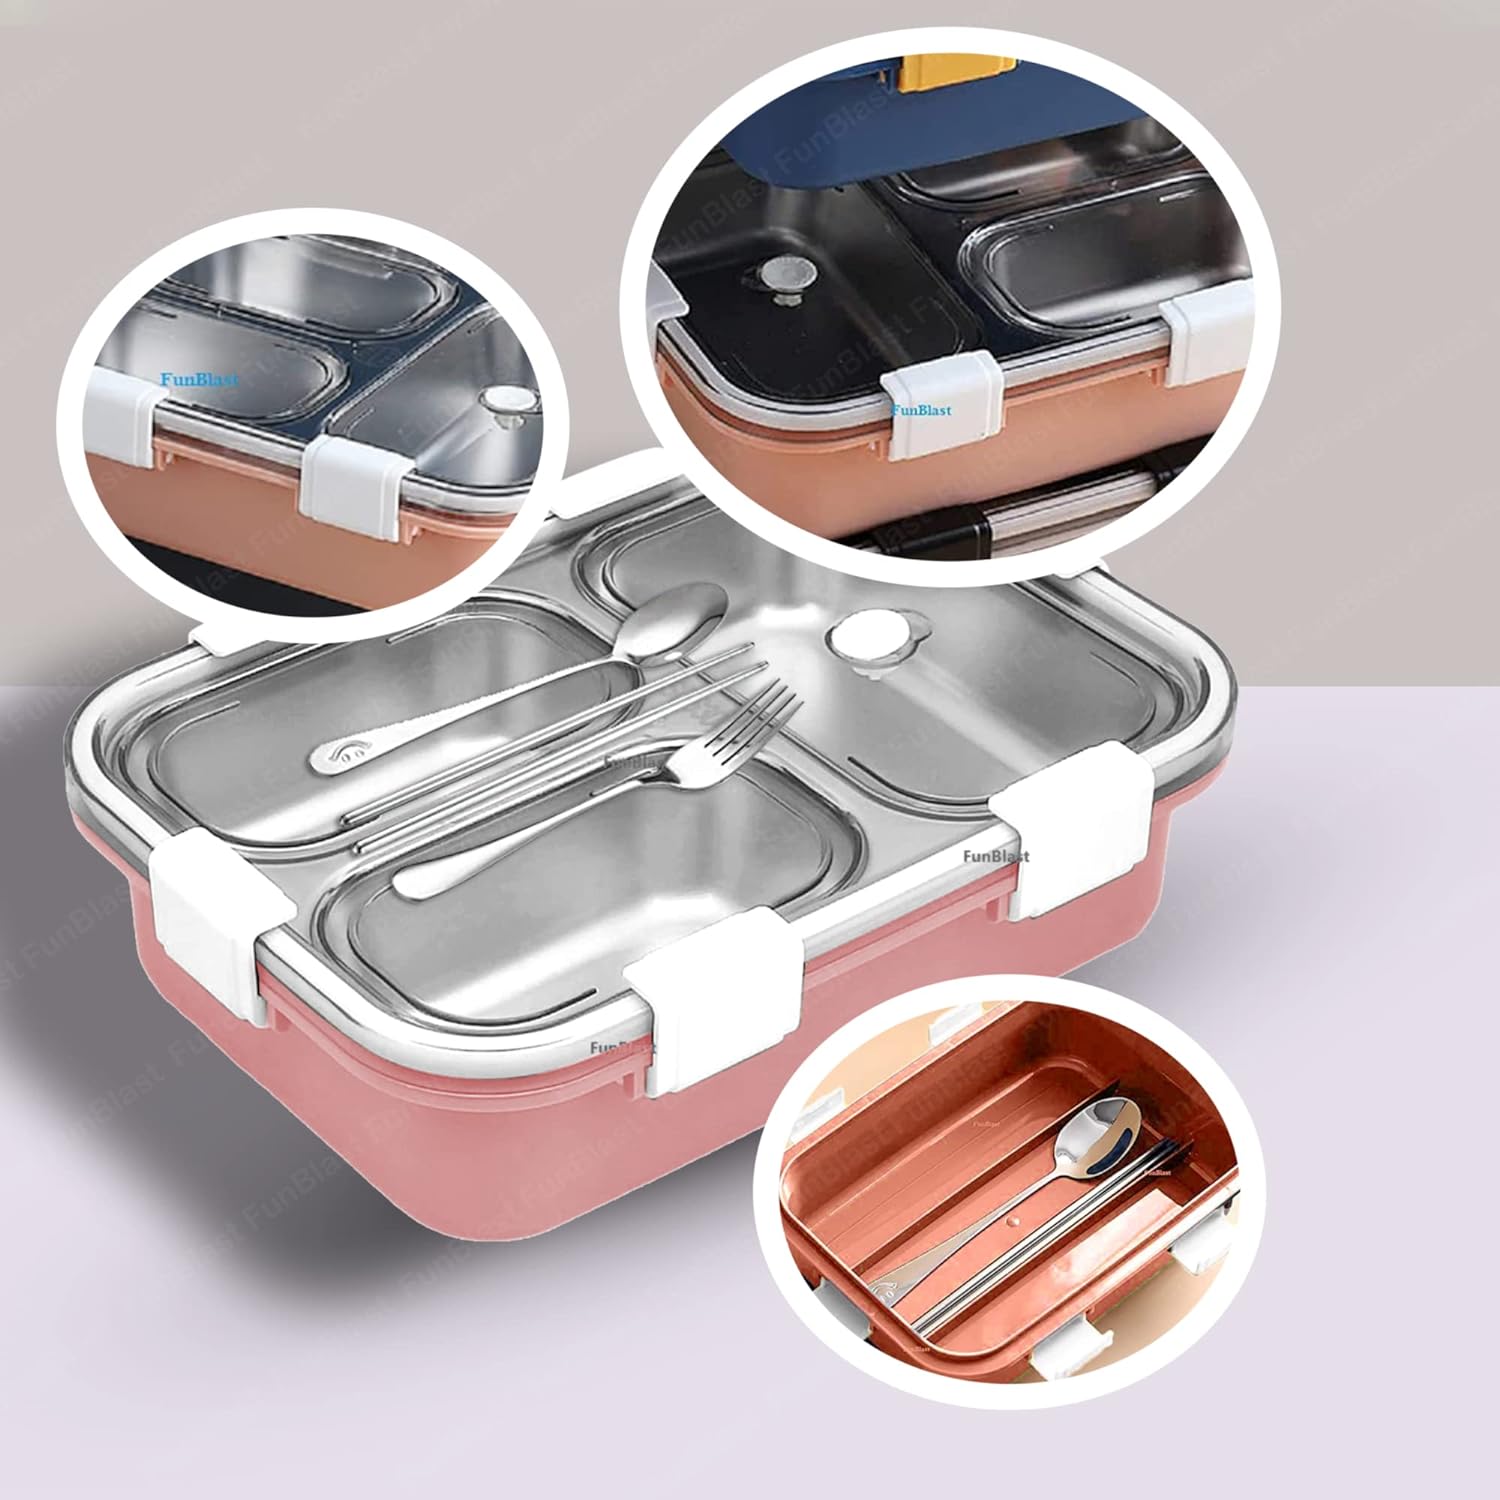 Stainless Steel Lunch Box for Kids, Tiffin Box, Bento Lunch Box with Chopstick Spoon & Fork, Insulated Lunch Box (Not Leak-Proof - for Dry Foods Only)